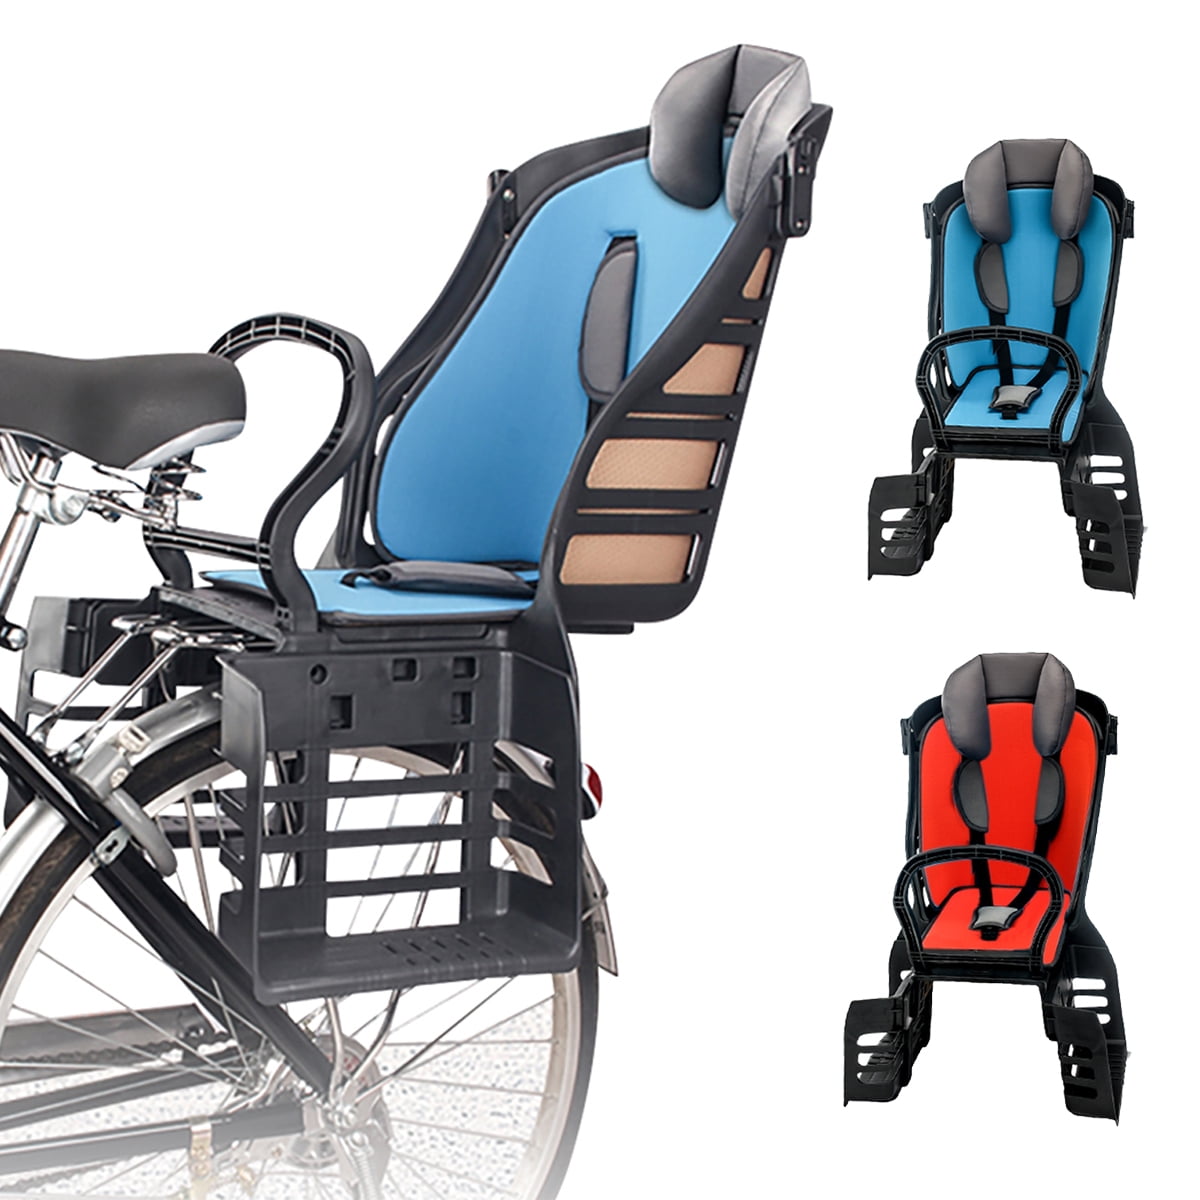 Futchoy Bicycle Child Seat Front Mount Kids Seat Bike Carrier Baby Safety Chair with Pedal,Comfortable Bicycle Kids Baby Child Front Safety Seat Chair Carrier Saddle Black 